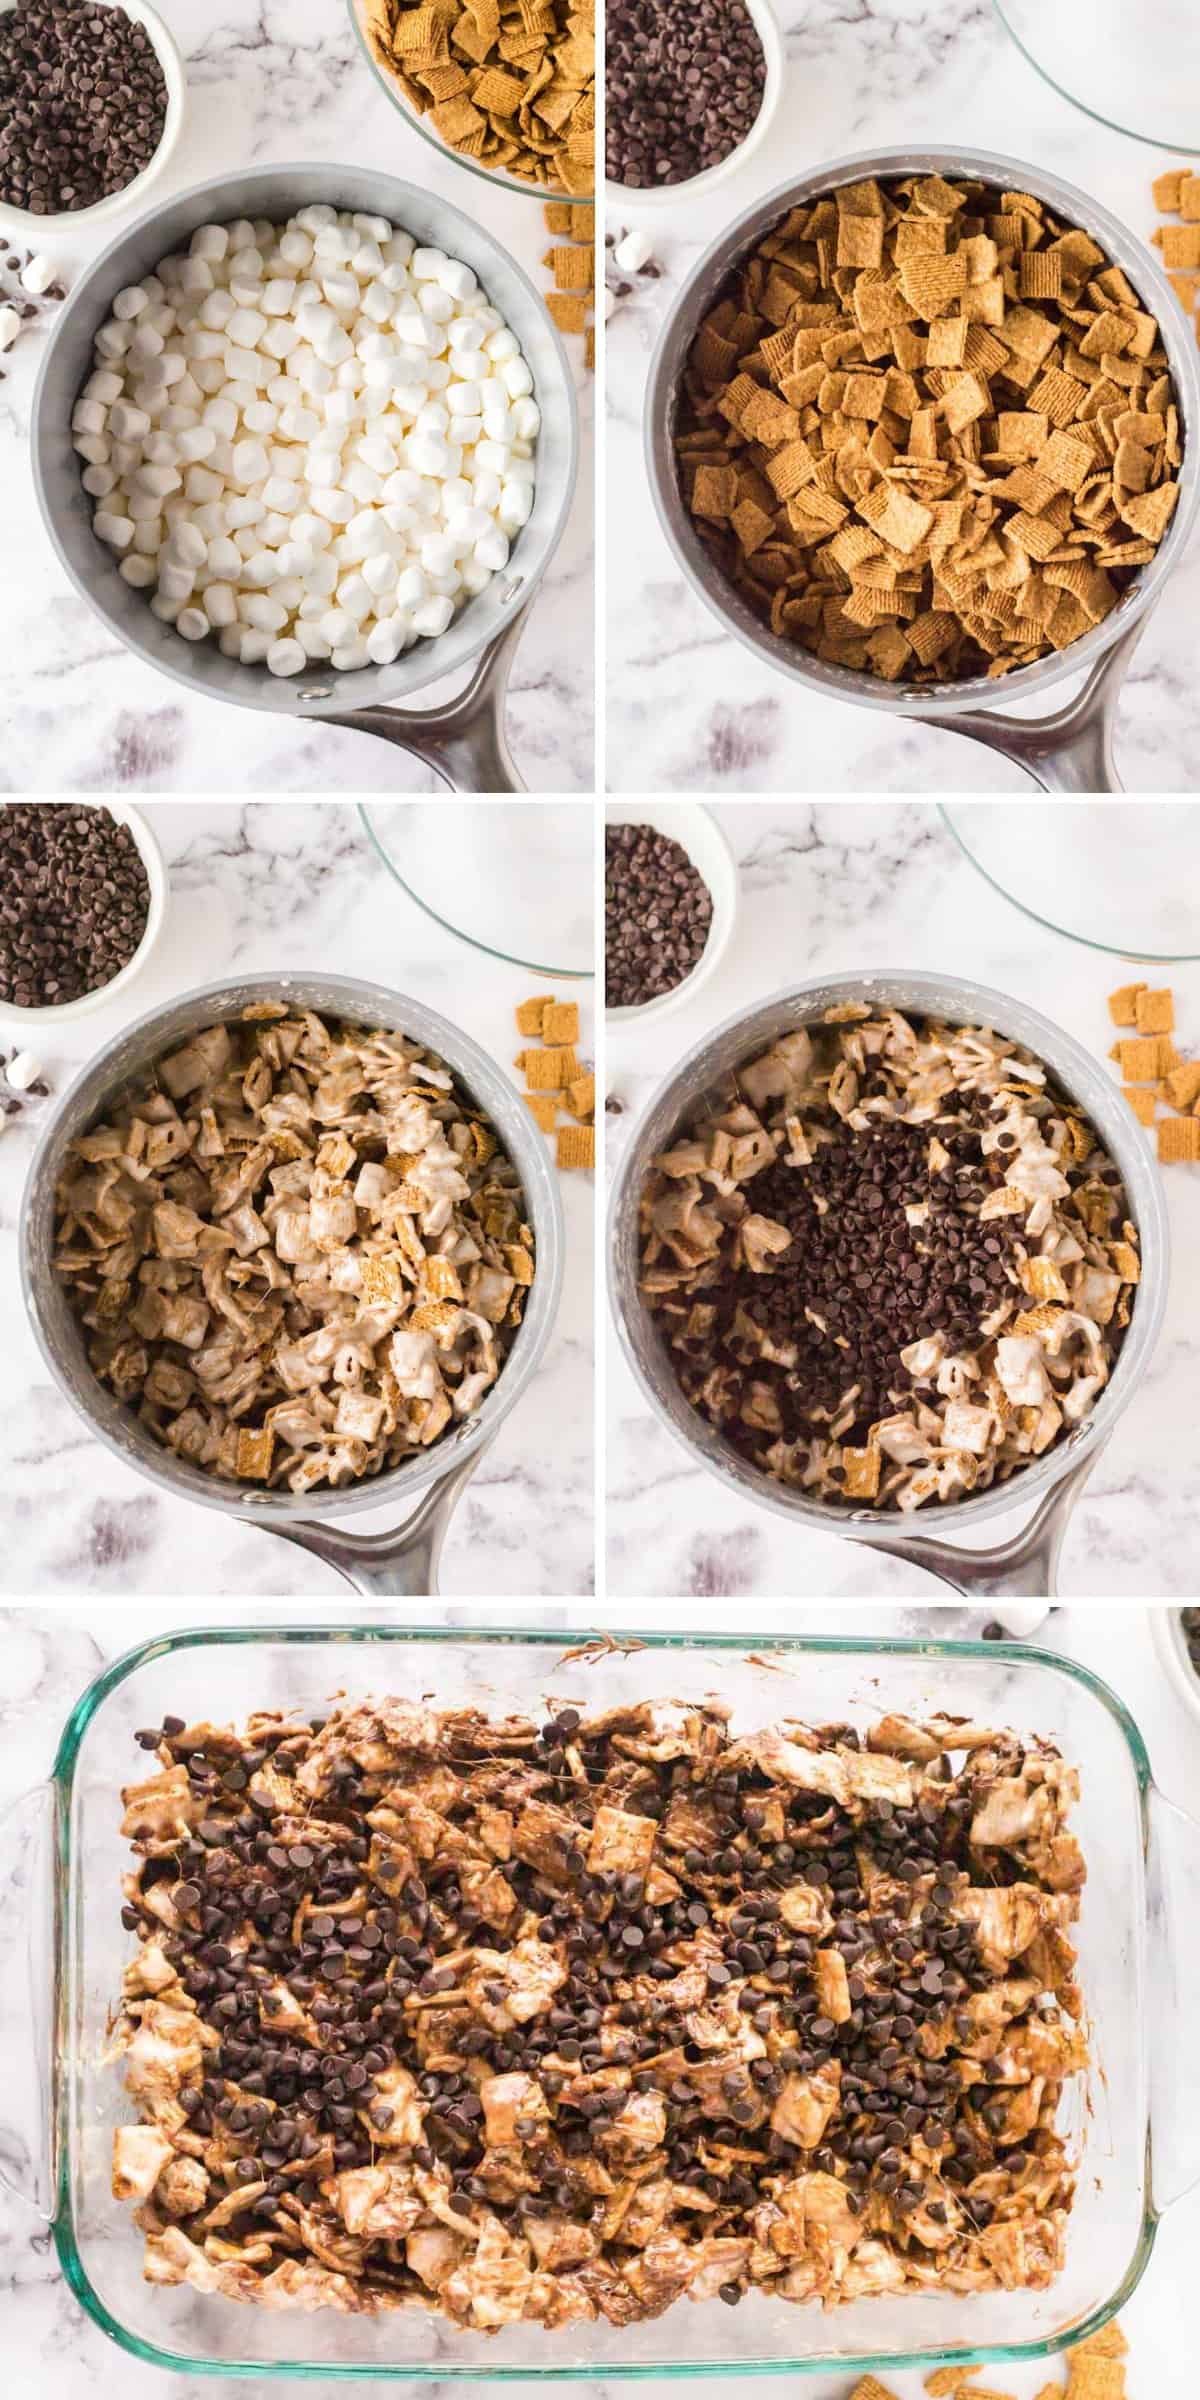 Collage image showing saucepan with marshmallows added before melting, then golden grahams cereal added, then chocolate chips added, and then poured into a glass baking dish.